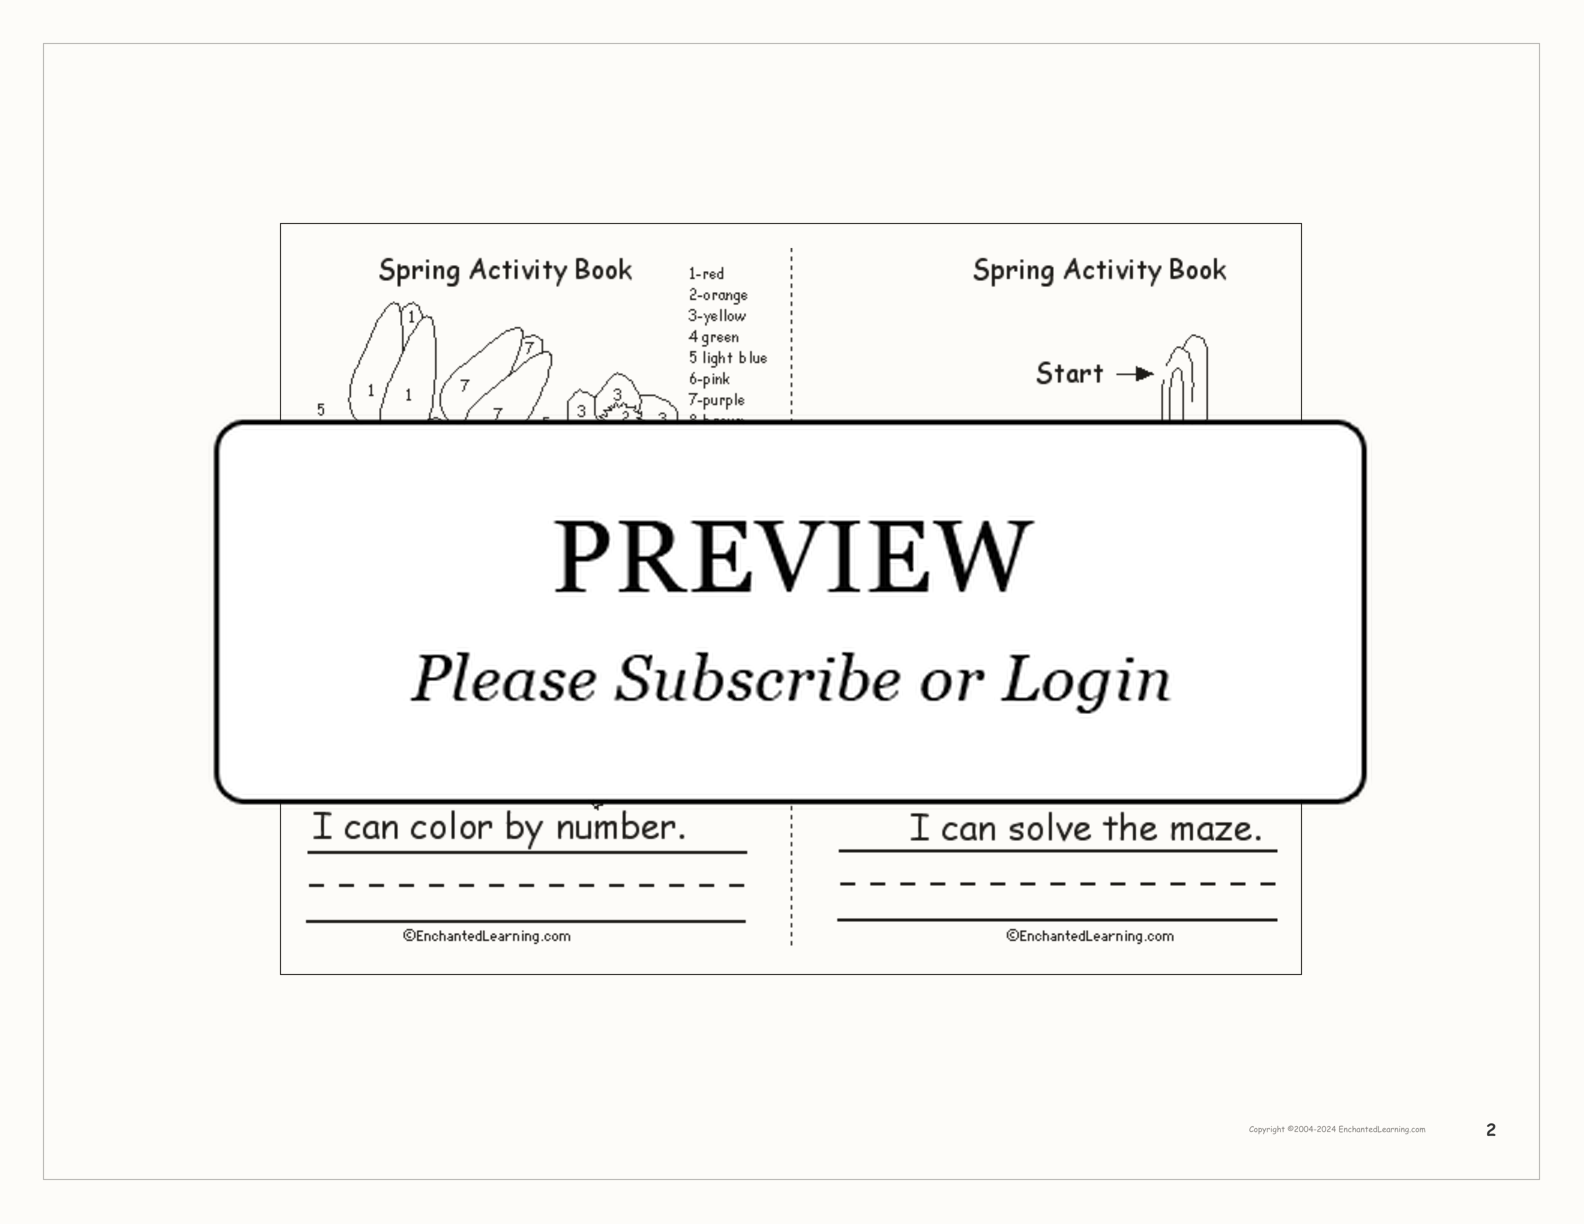 Spring Activity Book interactive worksheet page 2